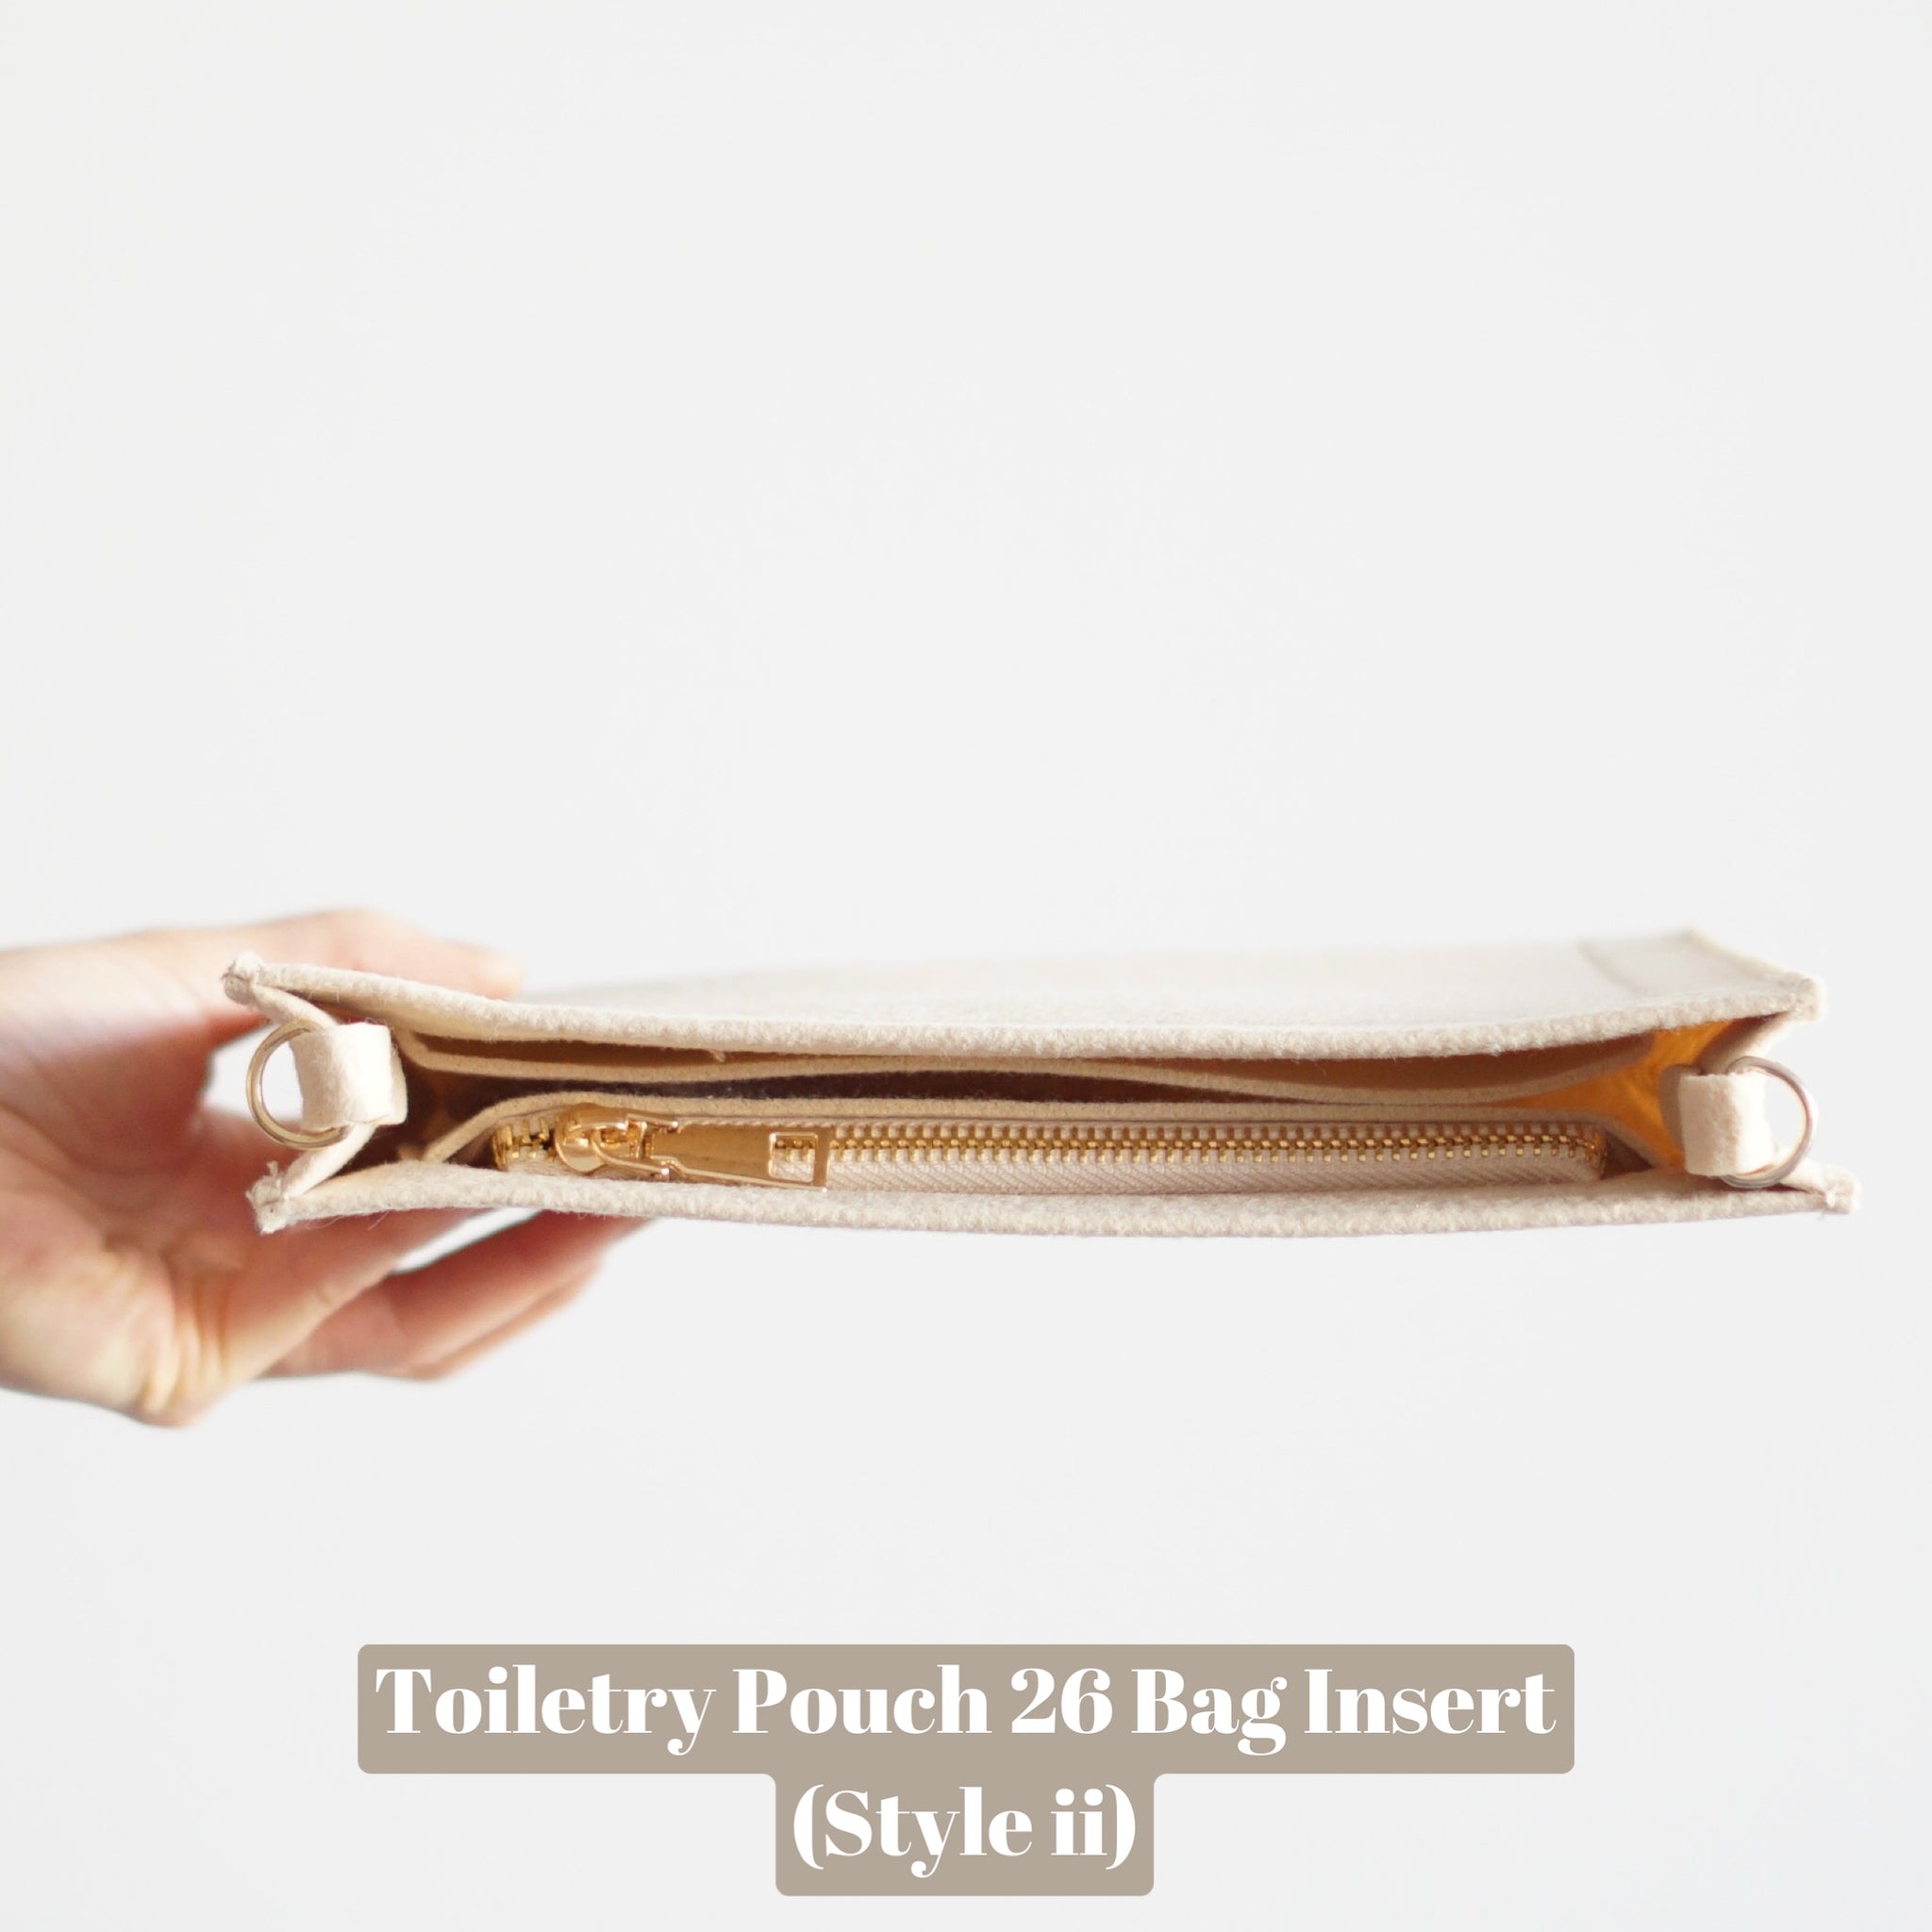 TOILETRY POUCH 26 CONVERSION KIT WITH 15” CHAIN/WASHABLE LEATHER